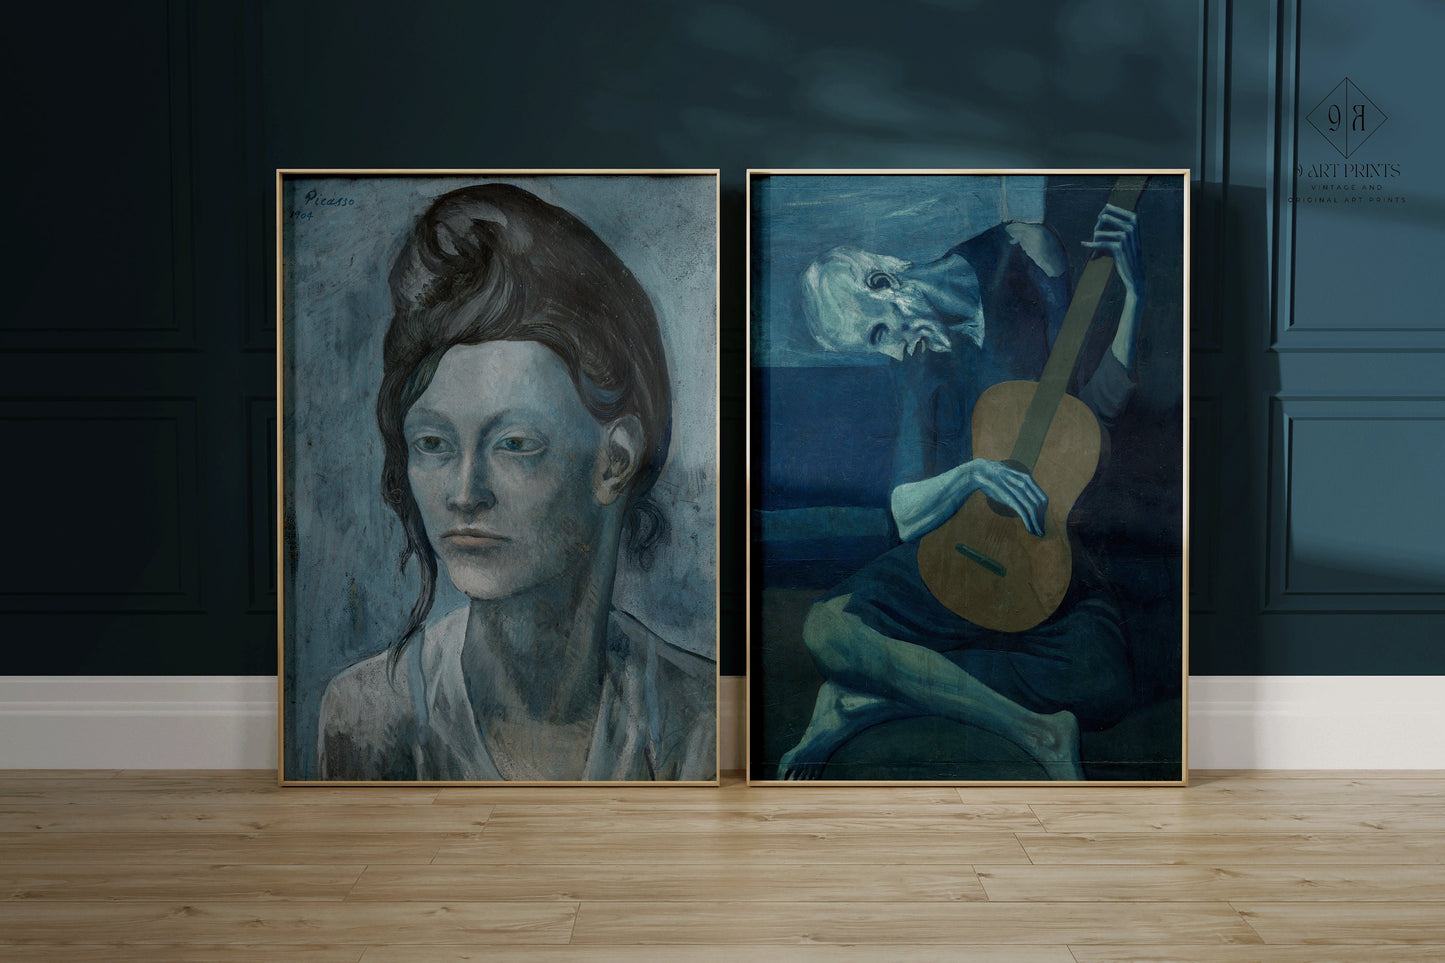 Pablo Picasso Set of 2 Art Prints - Woman with a Helmet of Hair and The Old Guitarist | Blue Gallery Wall Art (available framed or unframed)